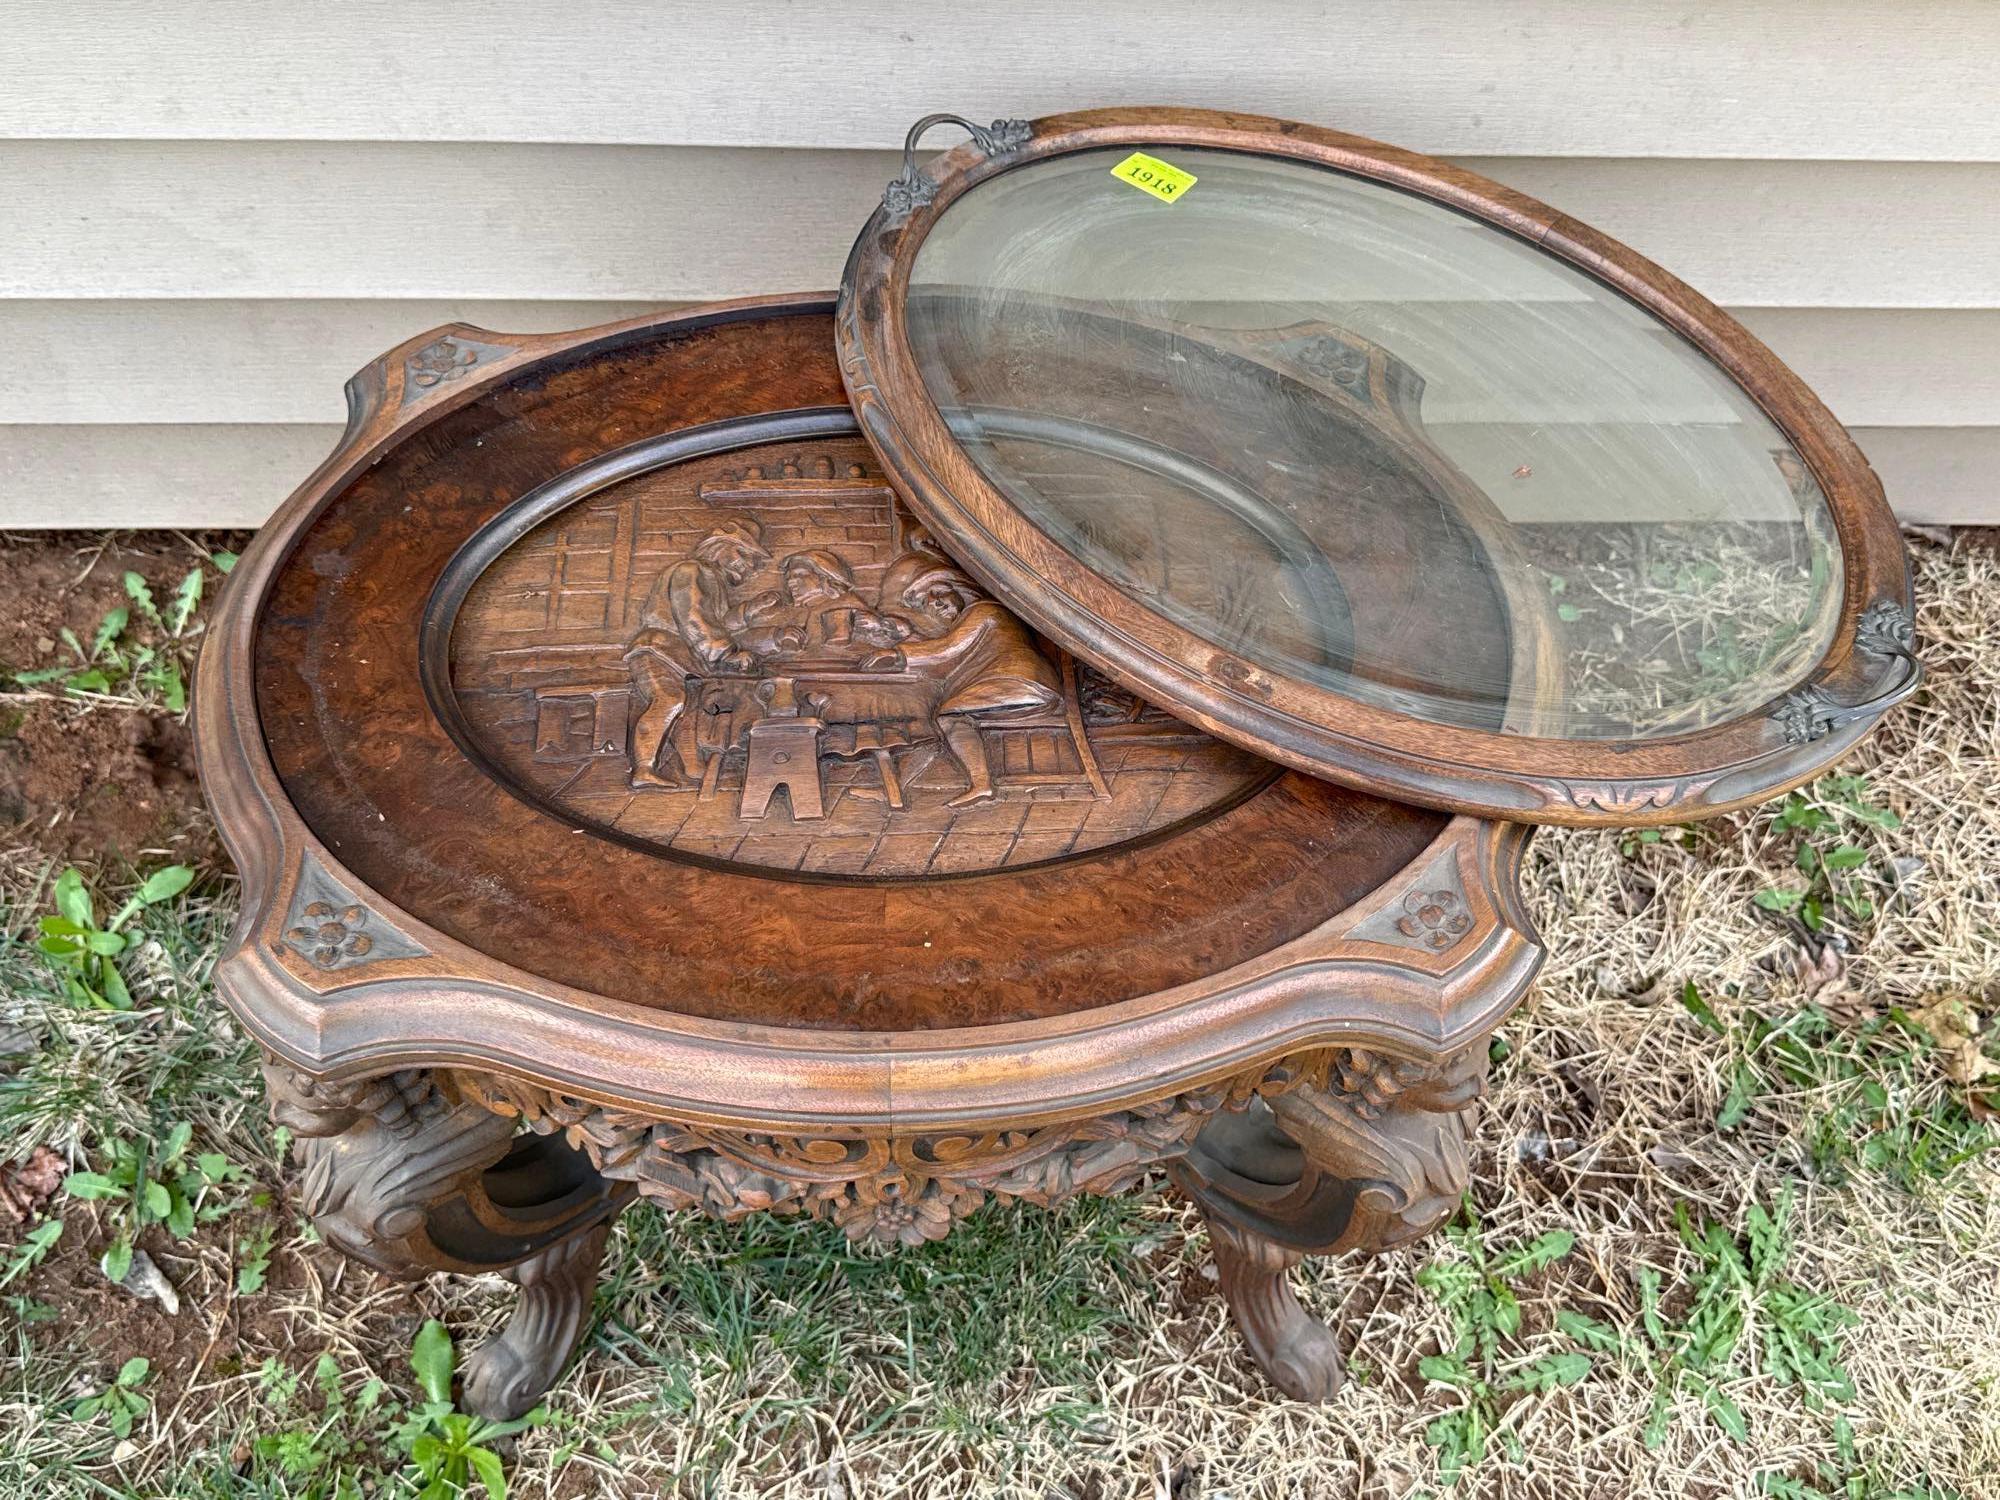 Antique Carved Wood Tavern Table with Glass Tray